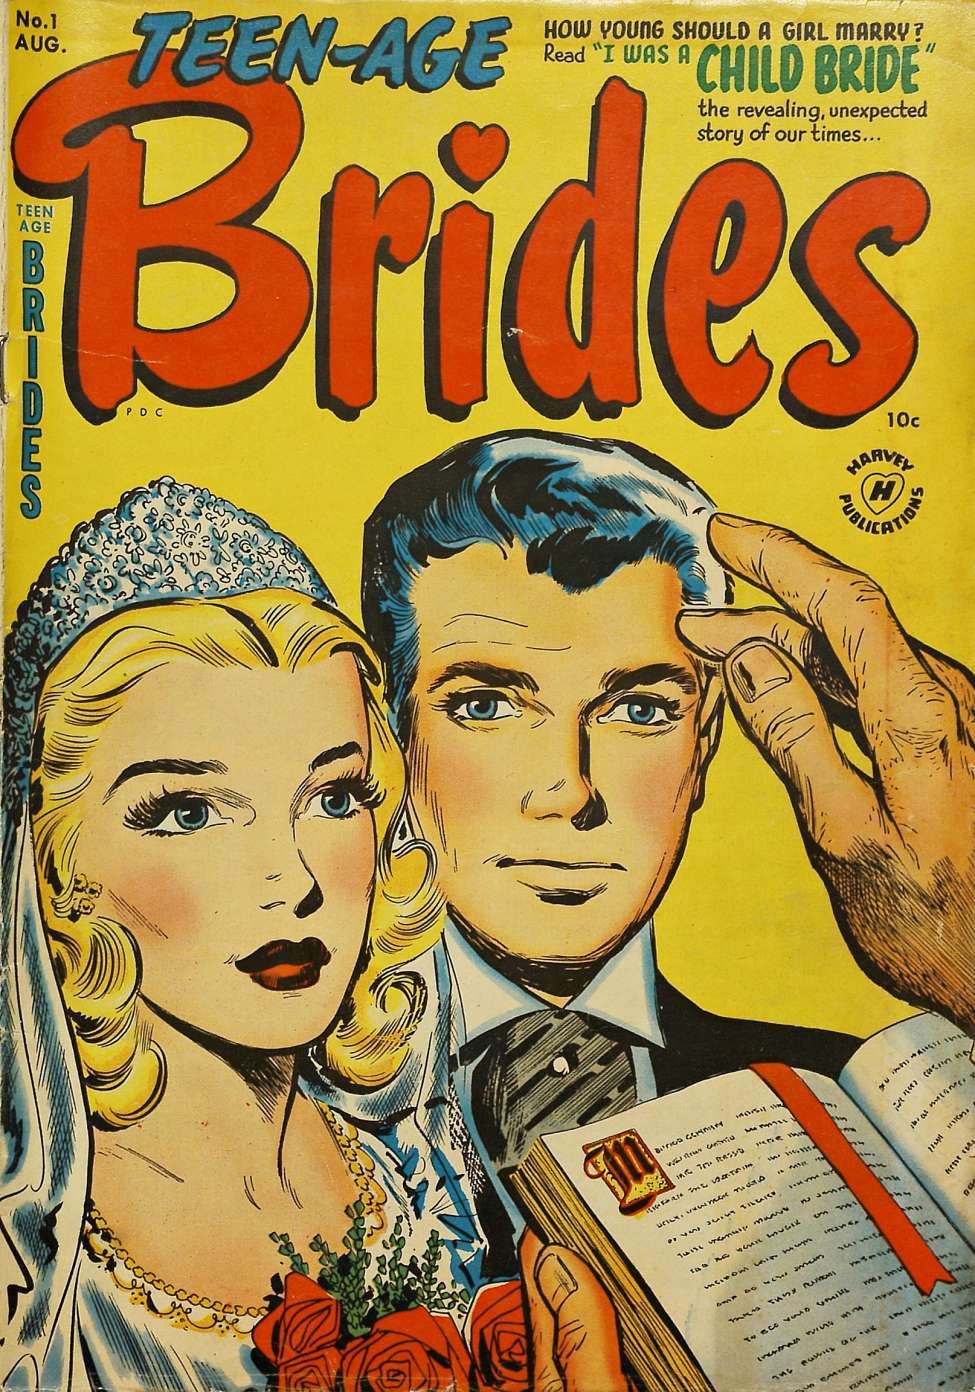 Image of the cover for Teen-Age Brides, issue 1.